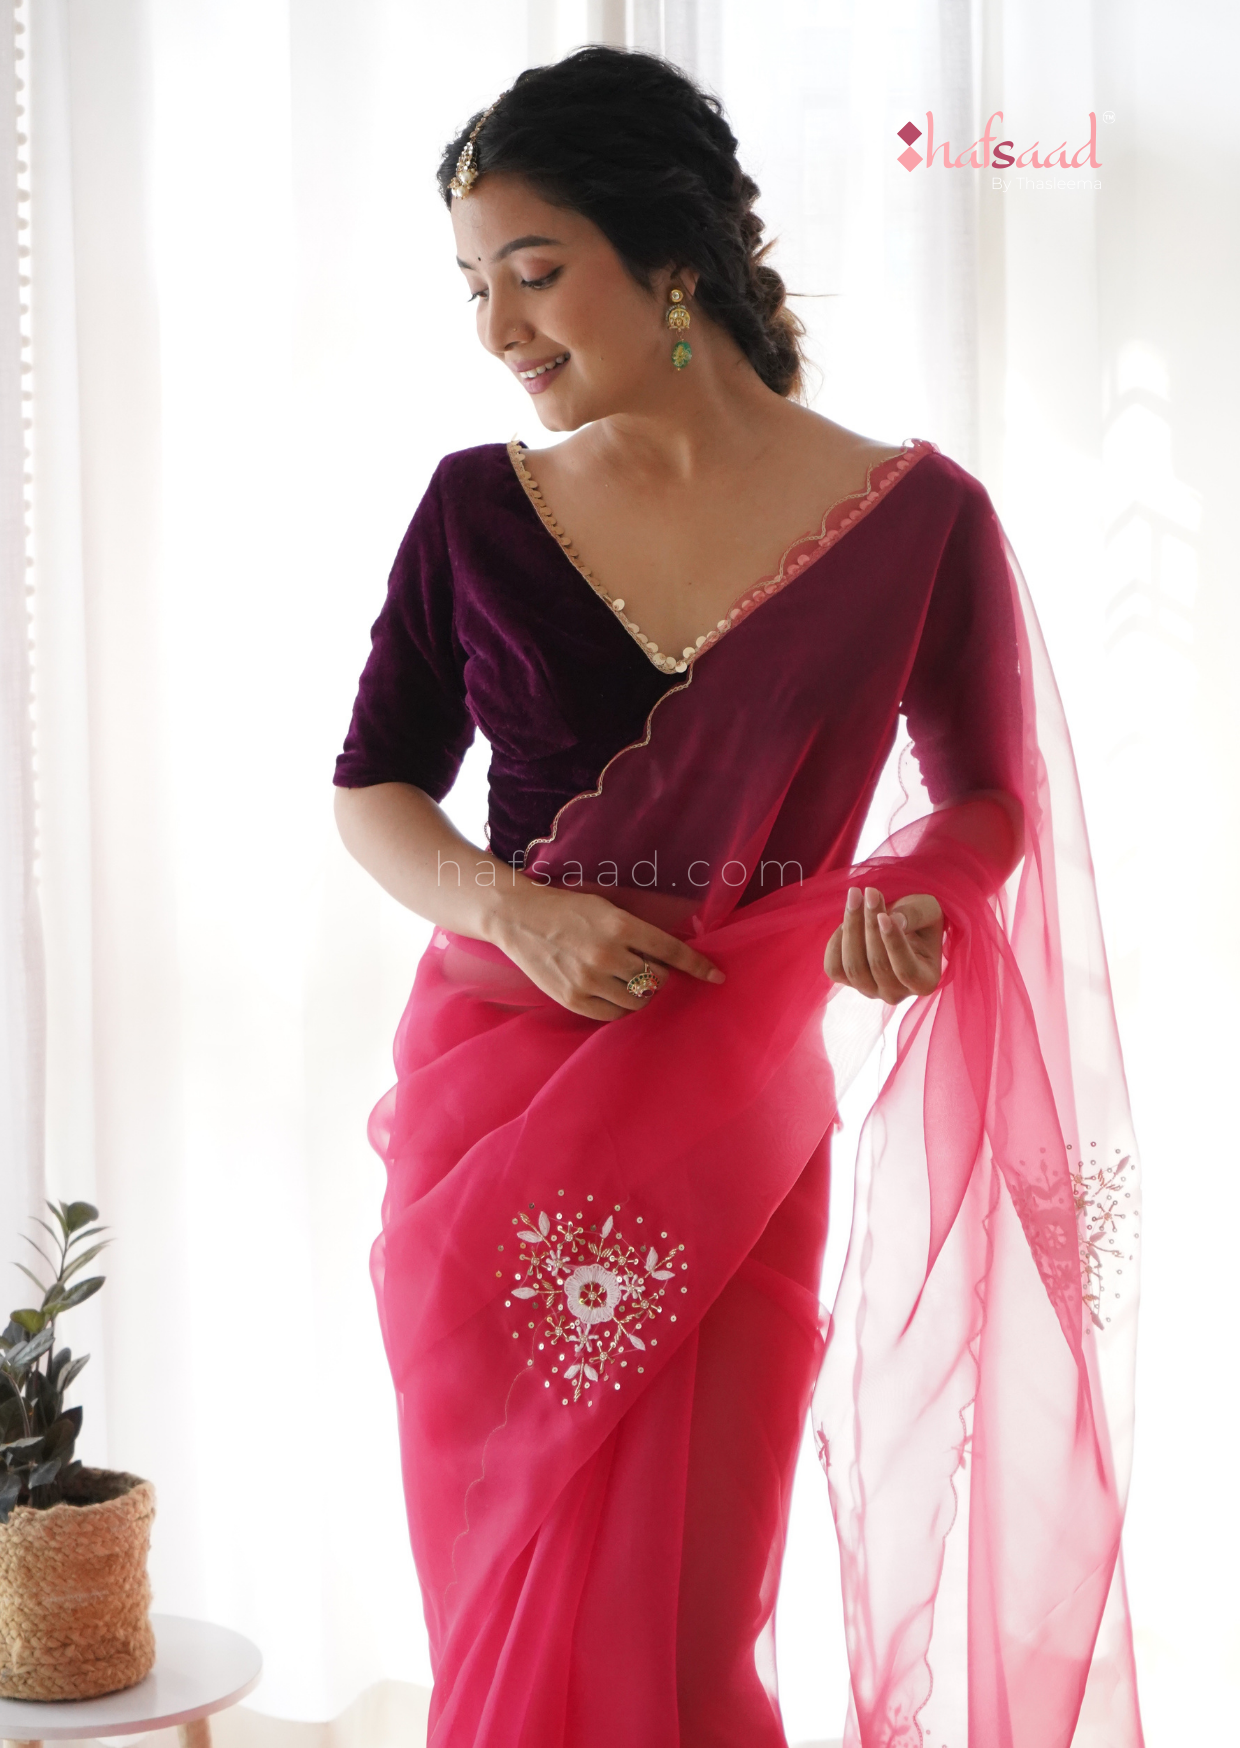 Rooh Afsa- Ready to wear saree